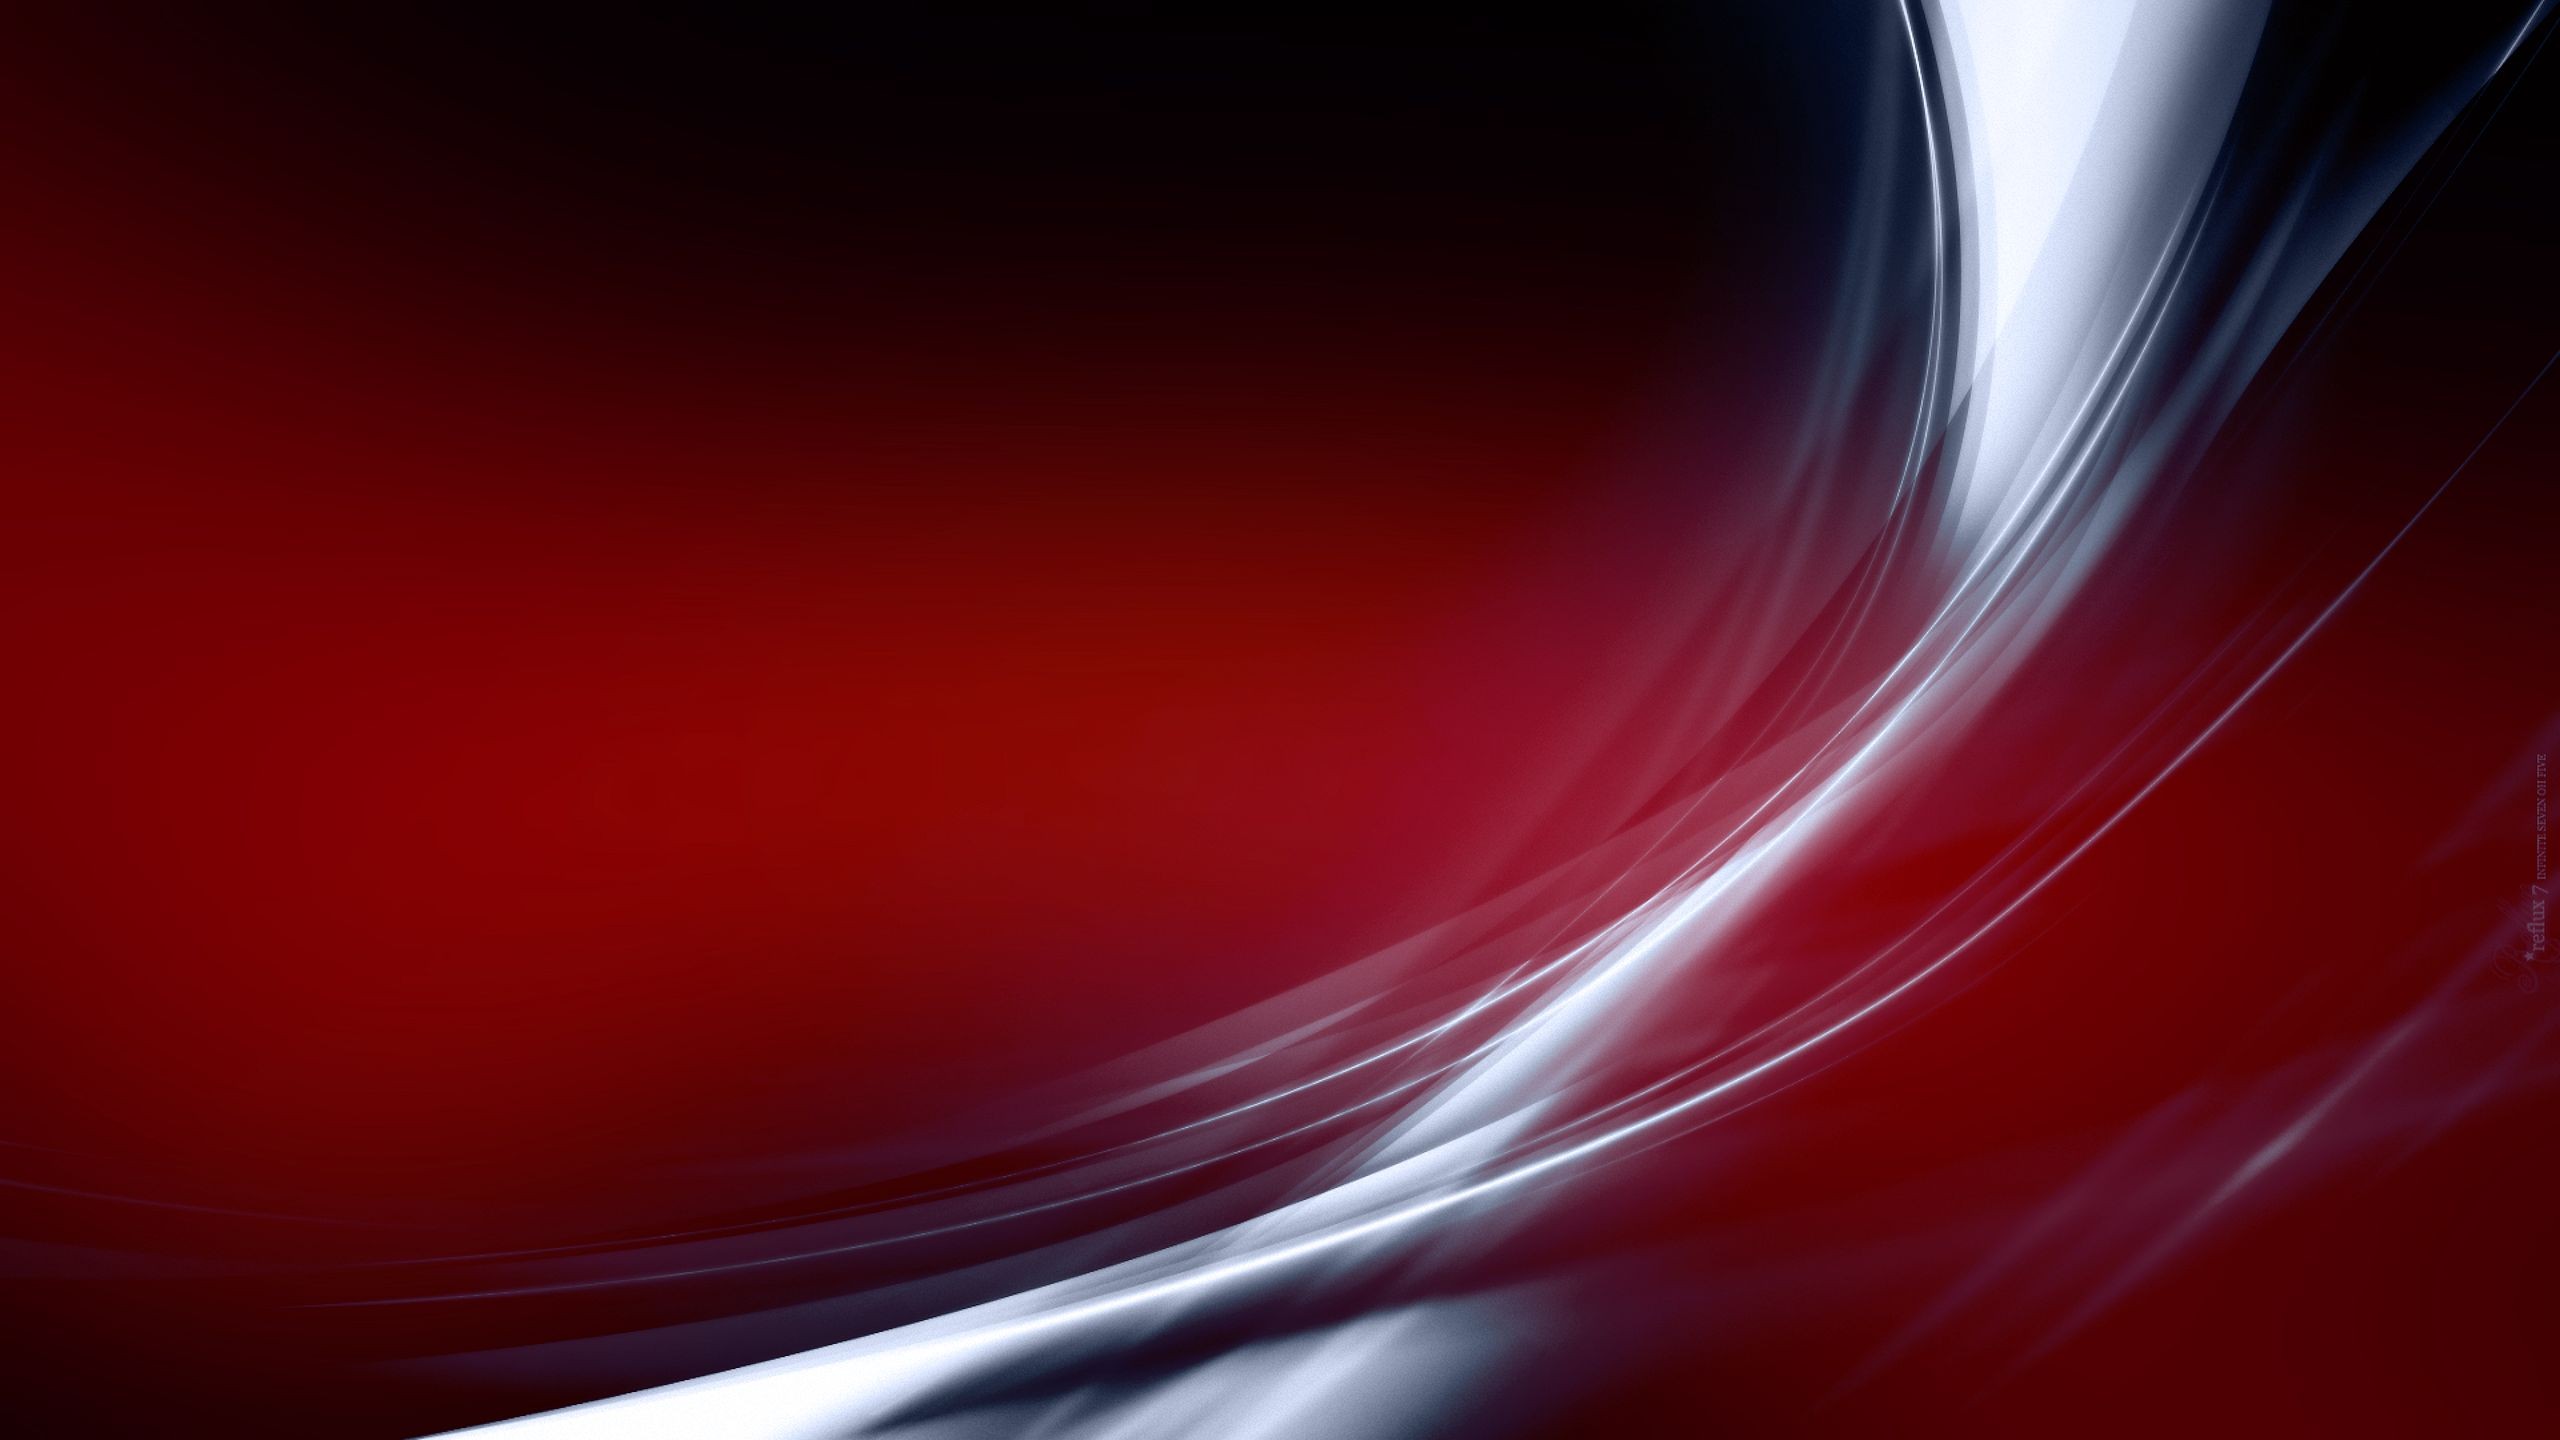 Red Digital Art, HD Abstract, 4k Wallpapers, Images, Backgrounds